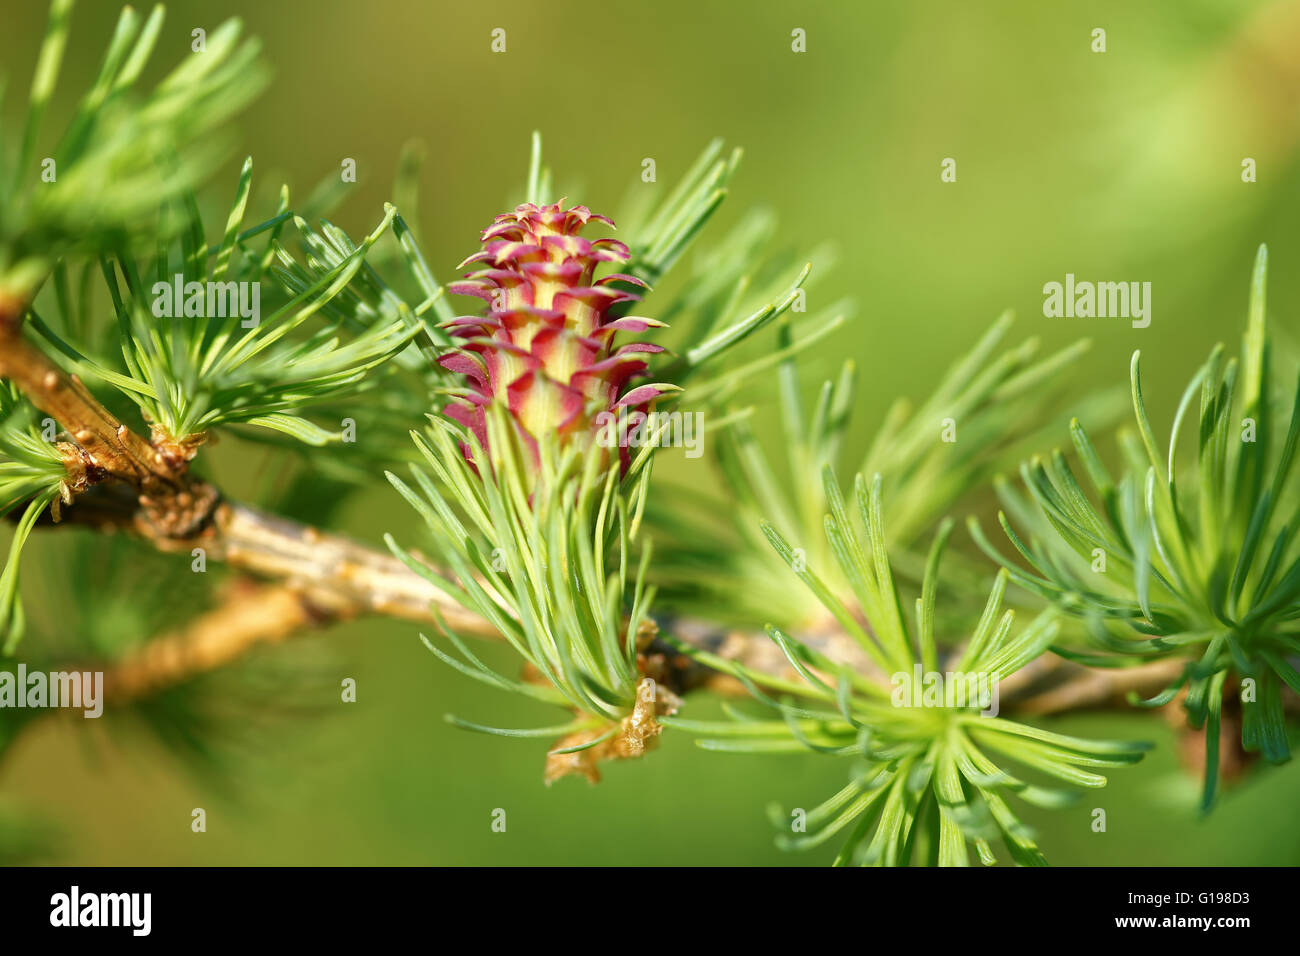 Ovulate cone (strobilus) of larch tree in spring, beginning of May. Stock Photo